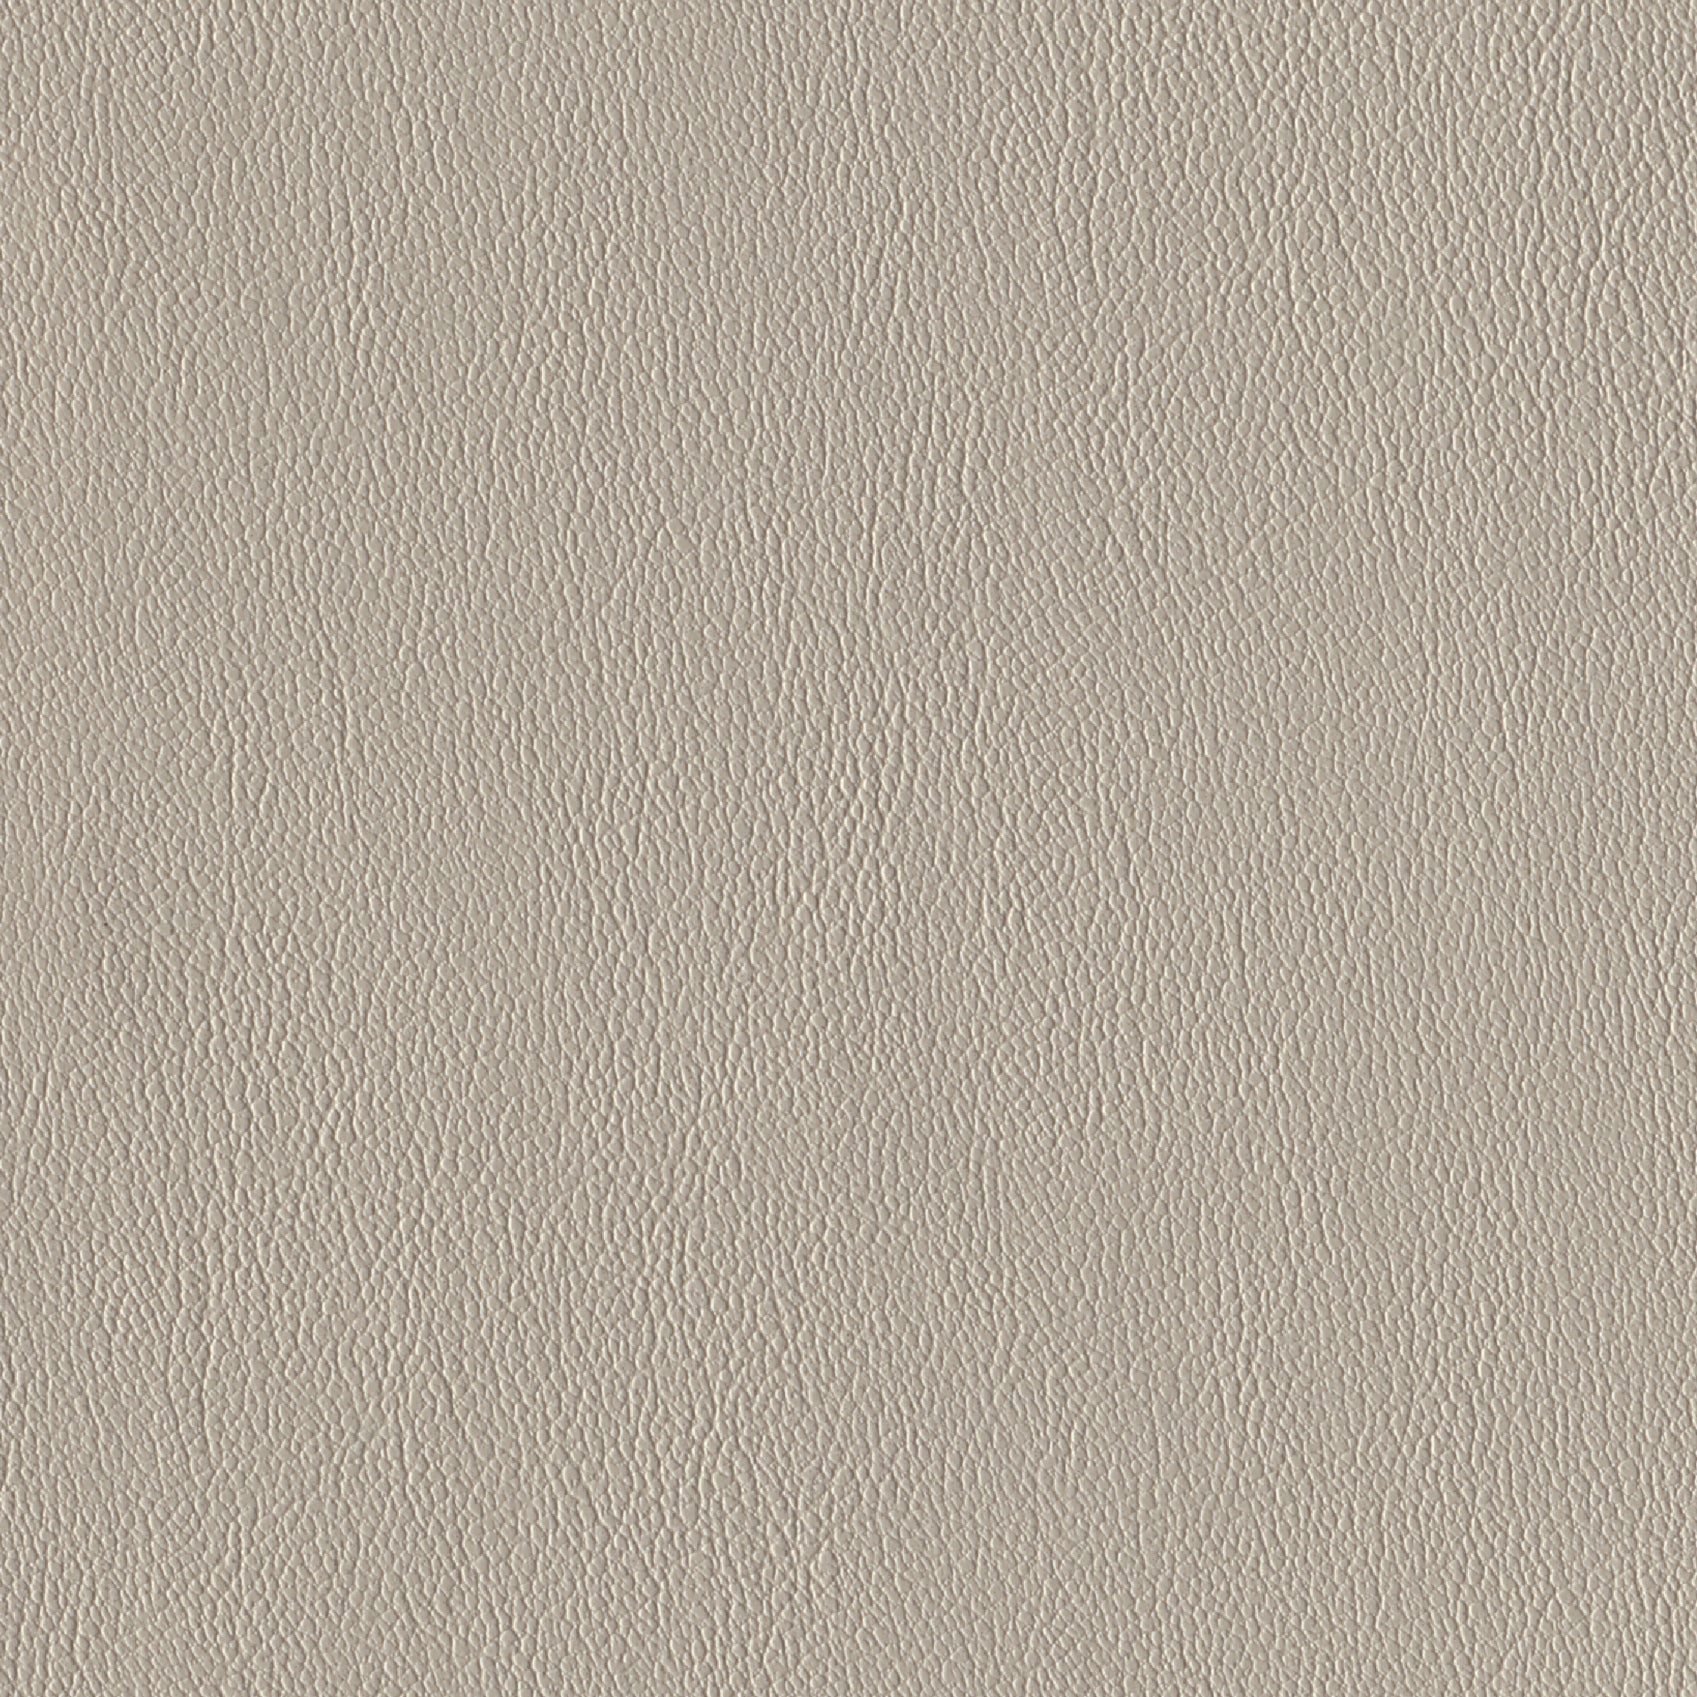 Andriali-Contract-Vinyl_Upholstery-Design-WesternFR5-Color-030Stone-Width-140cm-